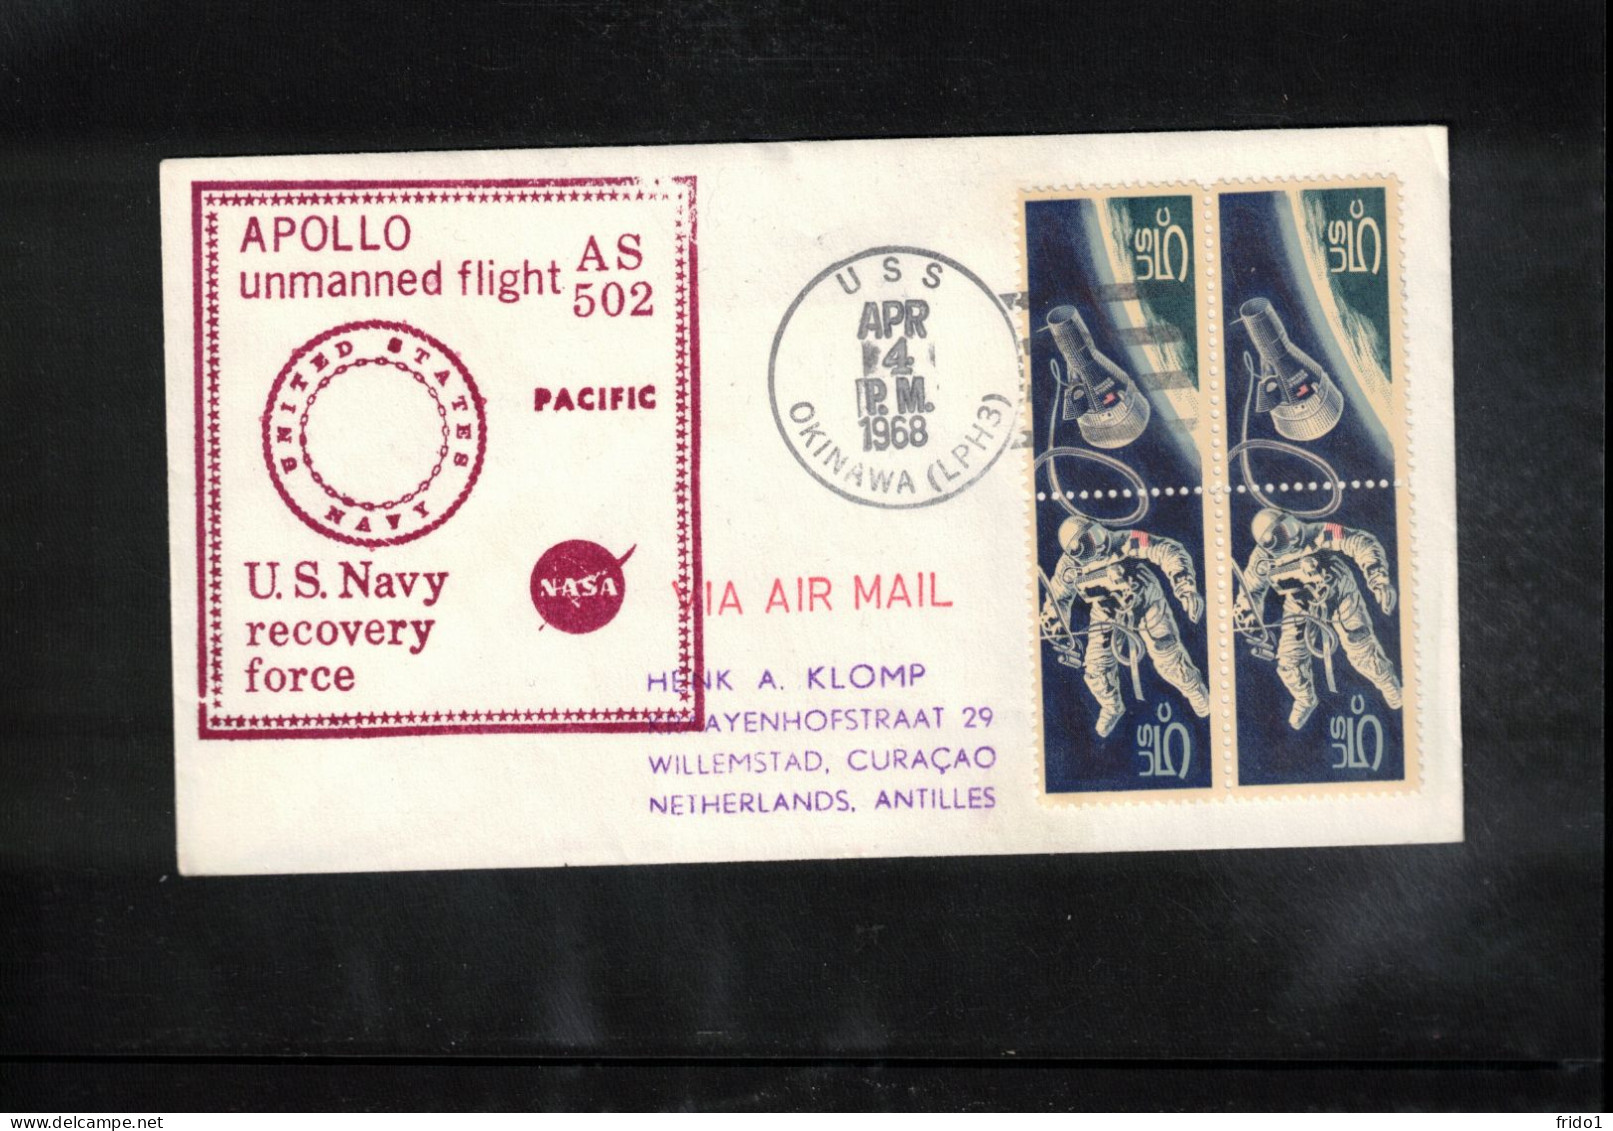 USA 1968 Space / Weltraum Apollo Unmanned Flight AS 502 - US Navy Recovery Force Ship USS Okinawa Interesting Cover - Verenigde Staten